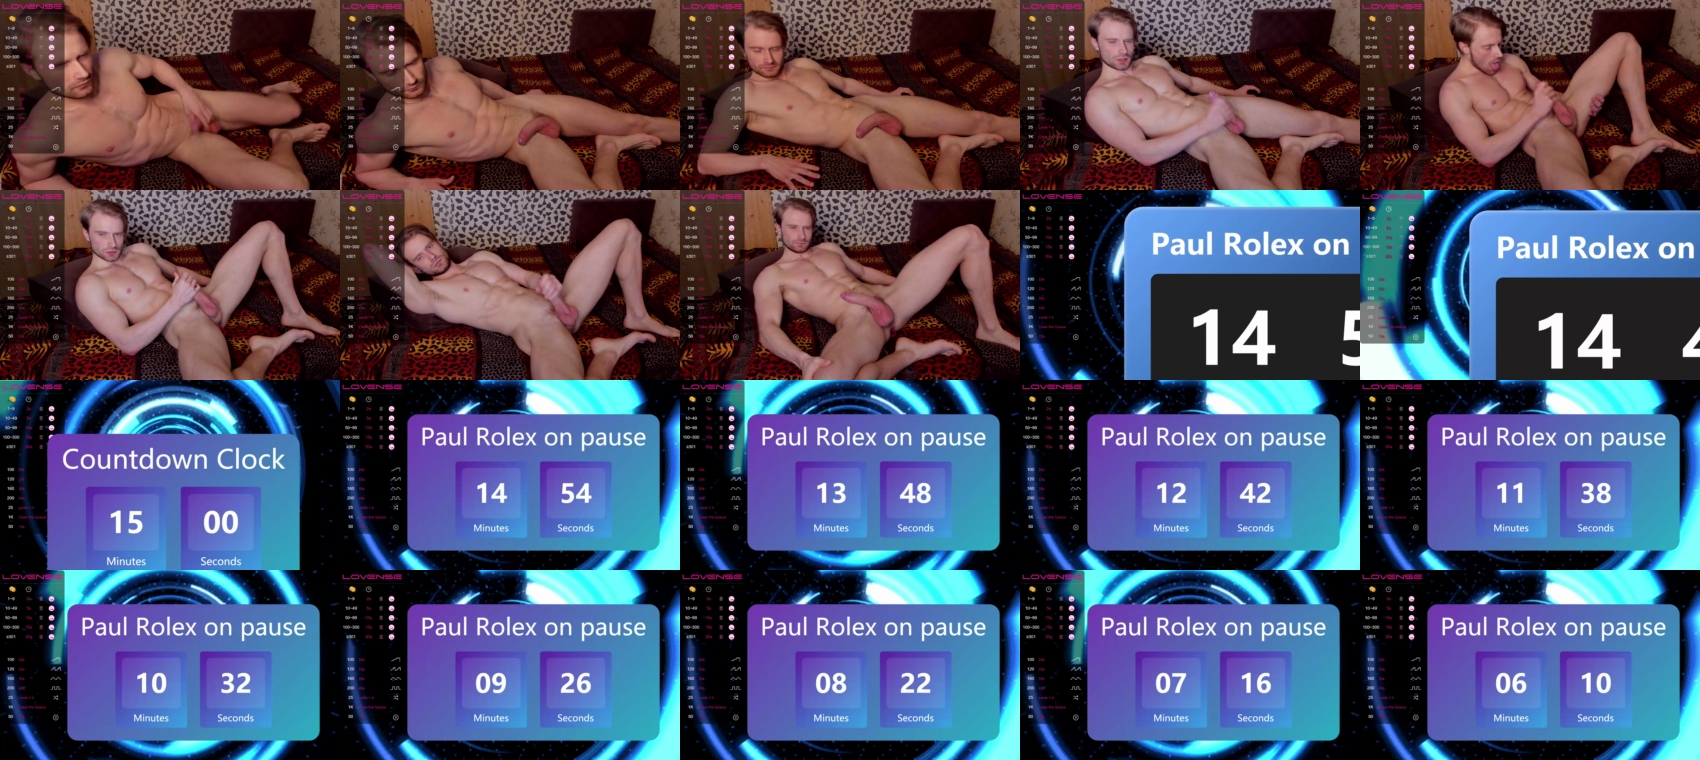 Paul_Rolex  23-10-2022 Recorded Video naughty